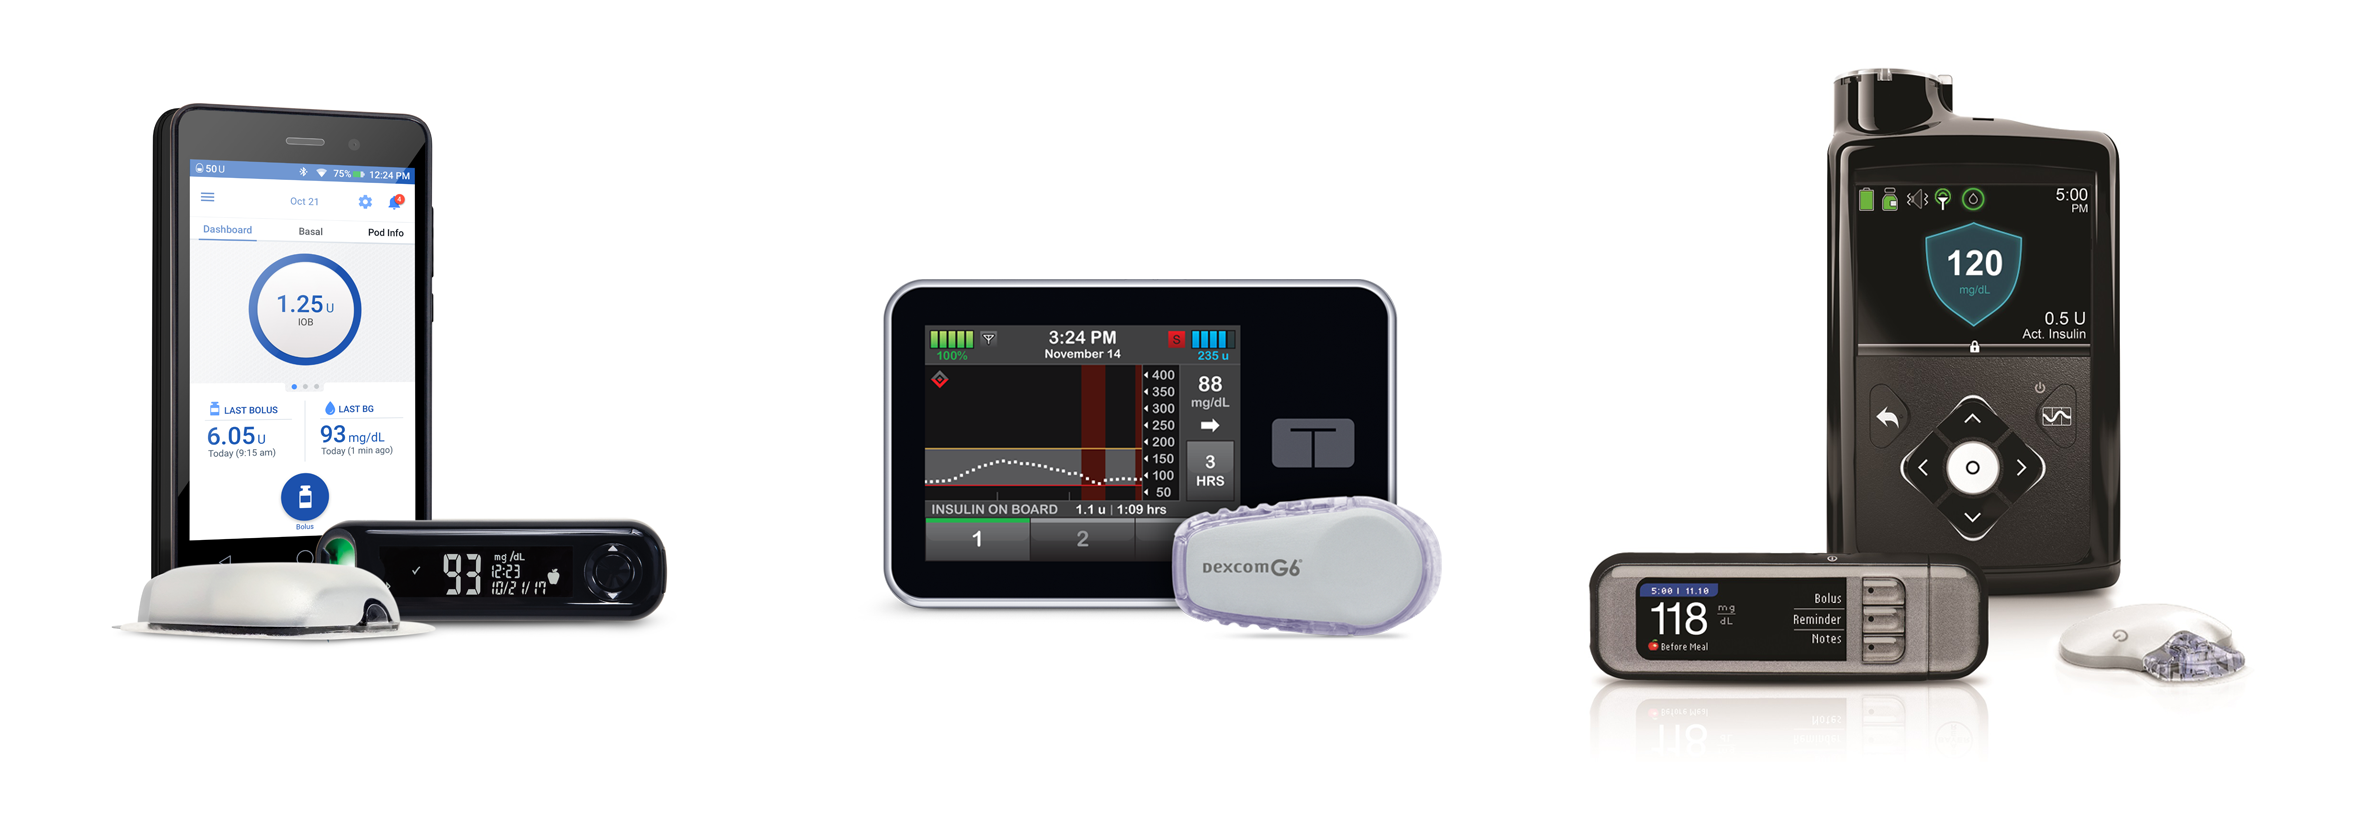 Insulin pumps available in the United States in January 2019. From left to right: The Omnipod, the Tandem t:slim with Dexcom G6, and the Medtronic 670G